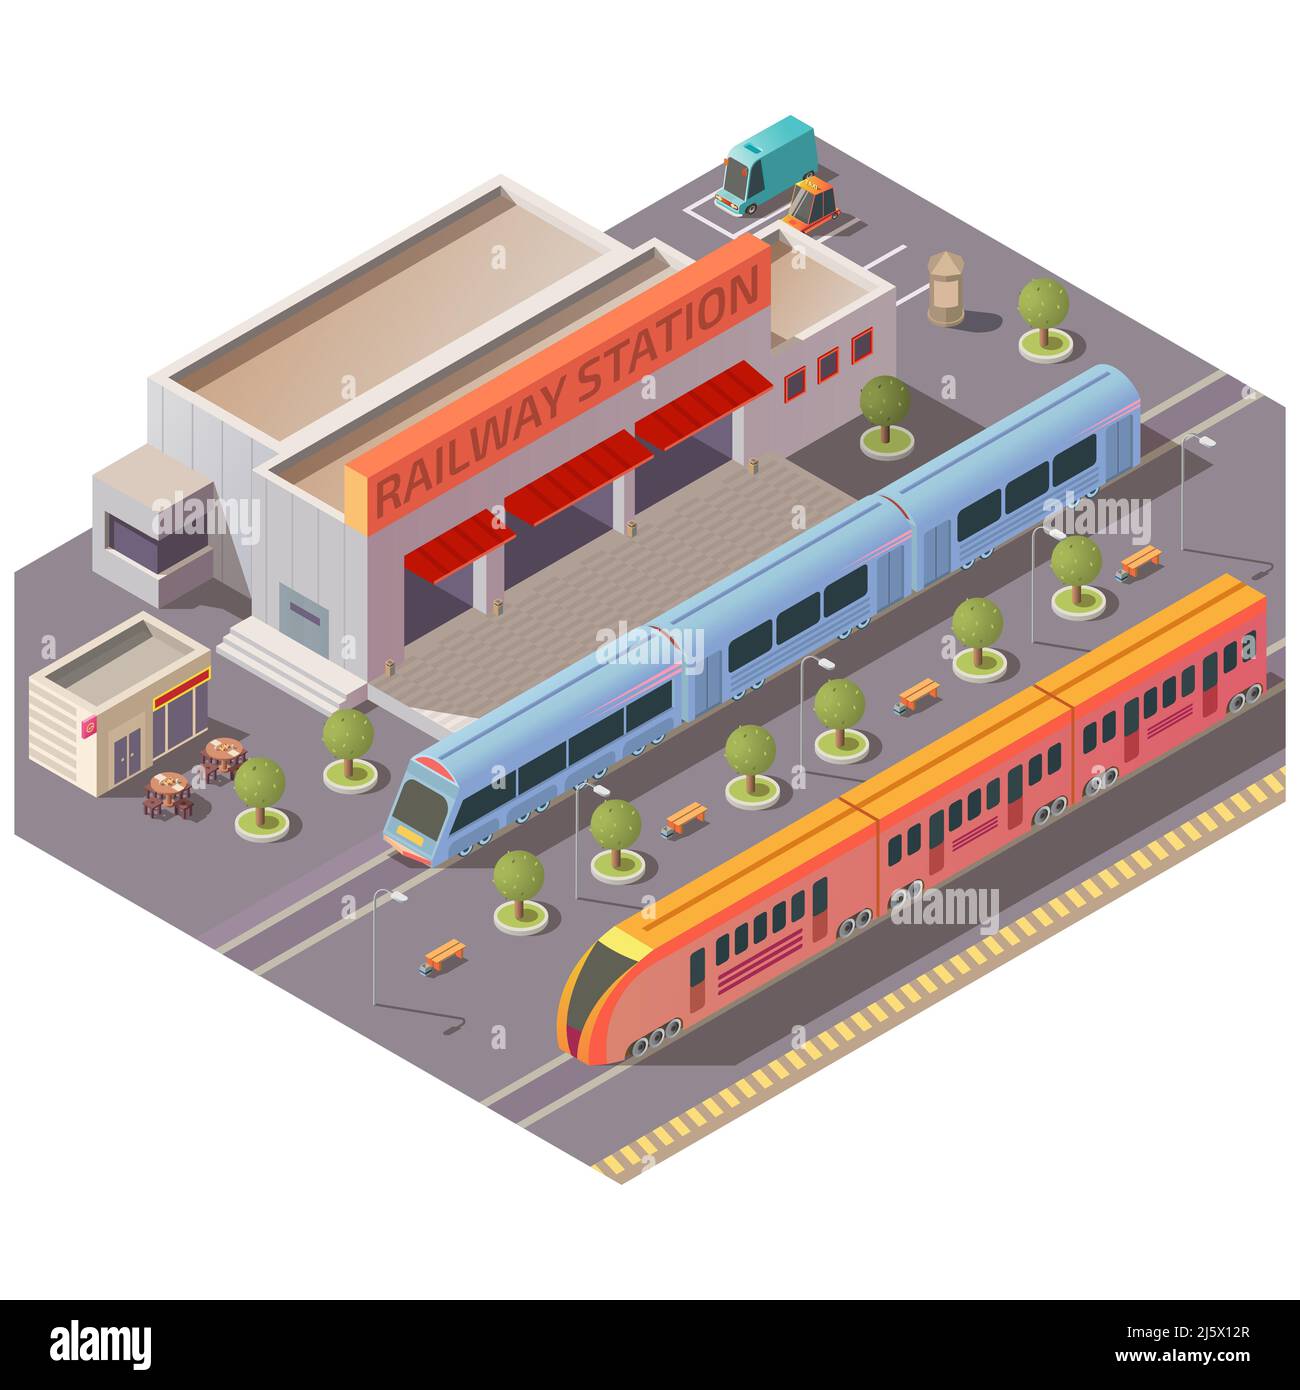 Modern railway station building, street cafe, parking with cars, high-speed passenger trains on rails, trees and benches on platform isometric vector. Stock Vector